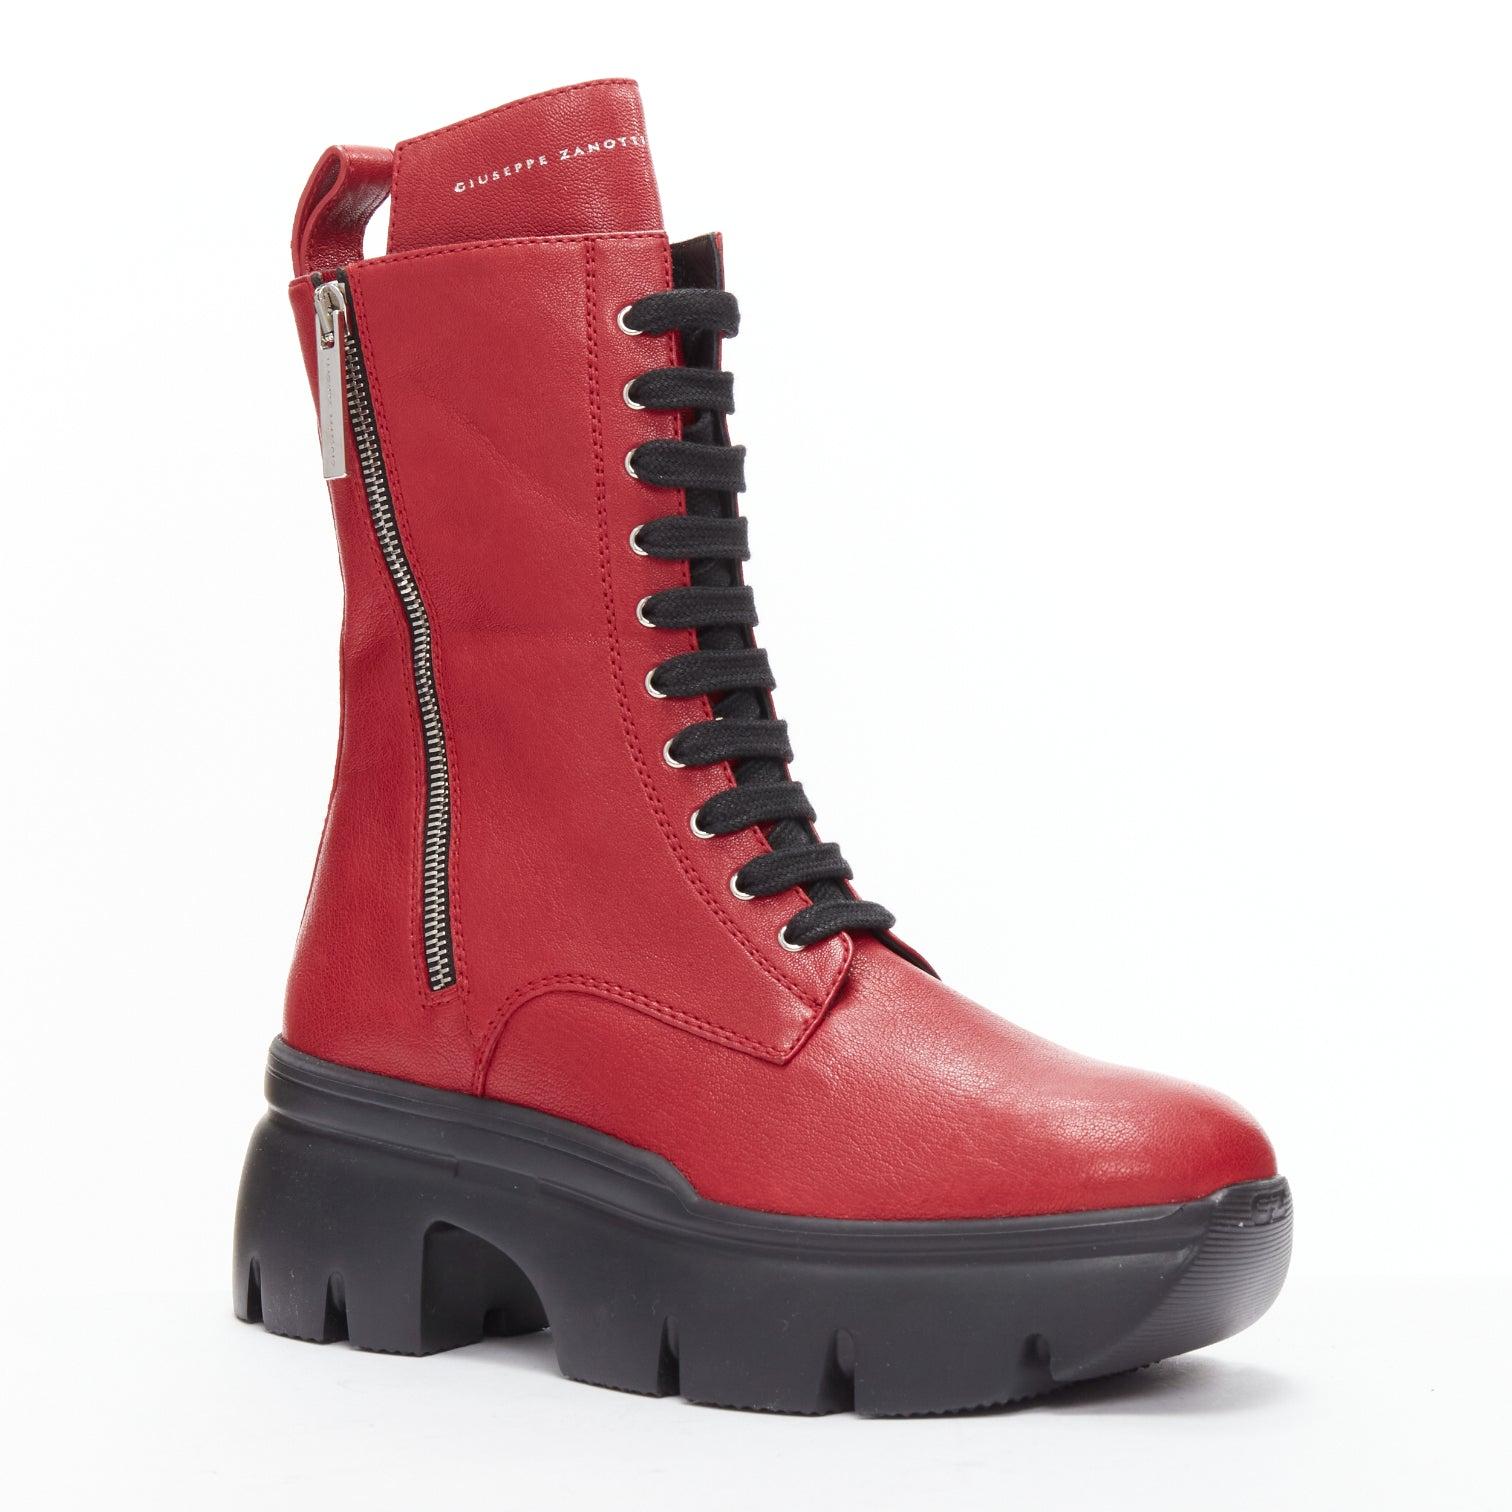 GIUSEPPE ZANOTTI Apocalypse red leather side zip combat boots EU39
Reference: AAWC/A00551
Brand: Giuseppe Zanotti
Model: Apocalypse
Material: Leather
Color: Red, Black
Pattern: Solid
Closure: Zip
Lining: Black Leather
Extra Details: Red patent